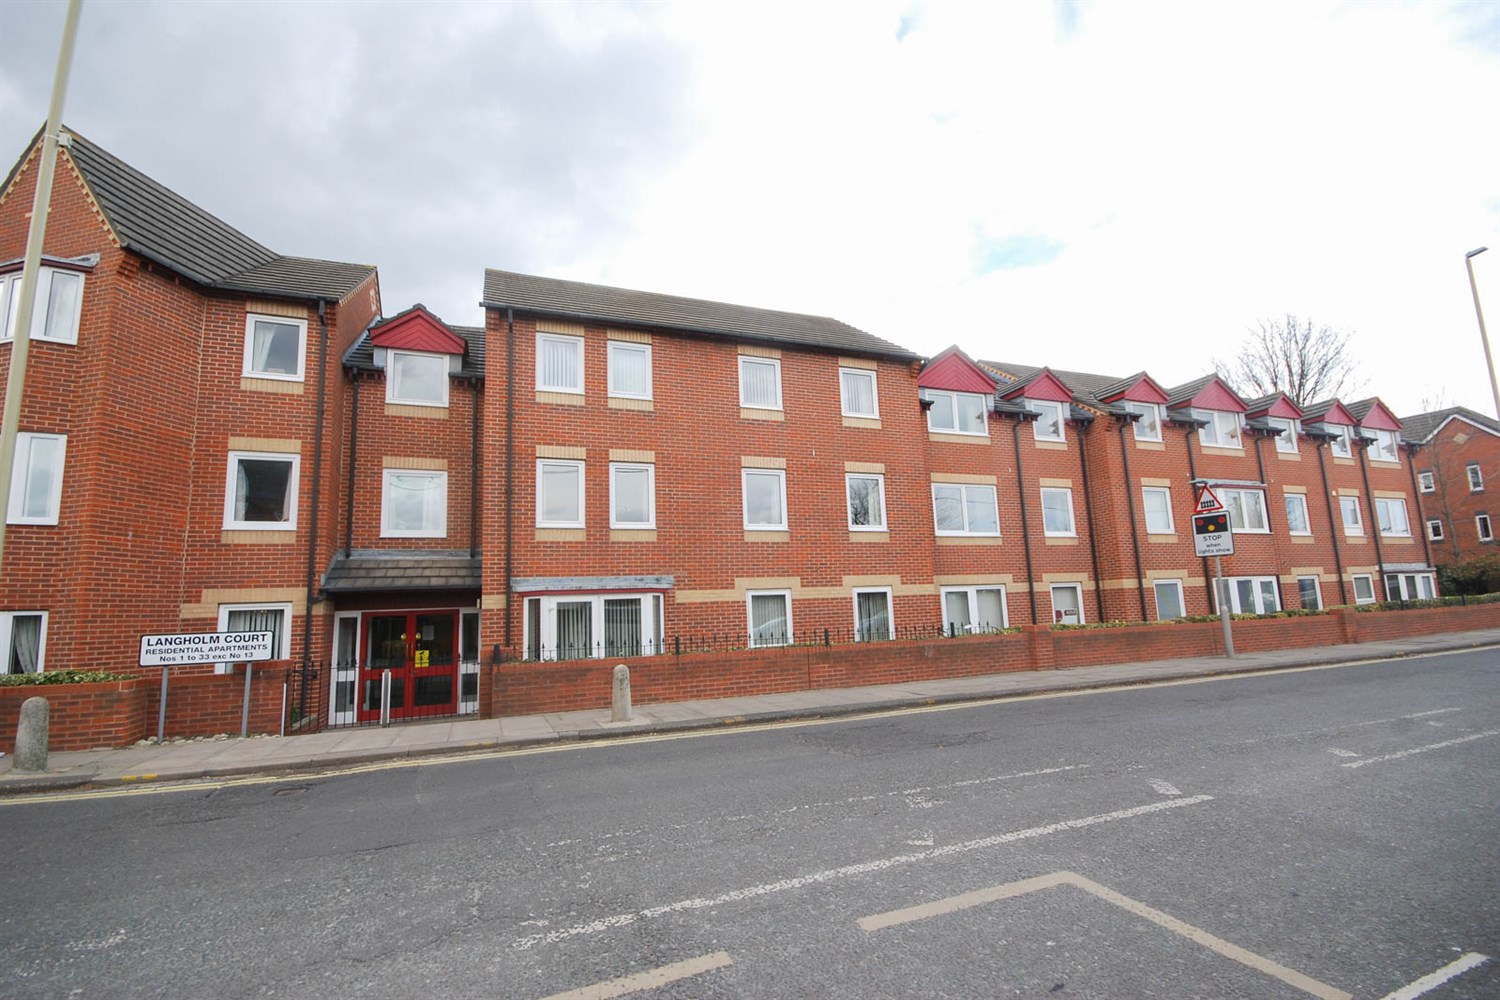 1 bed flat for sale in Langholm Court, East Boldon - Property Image 1